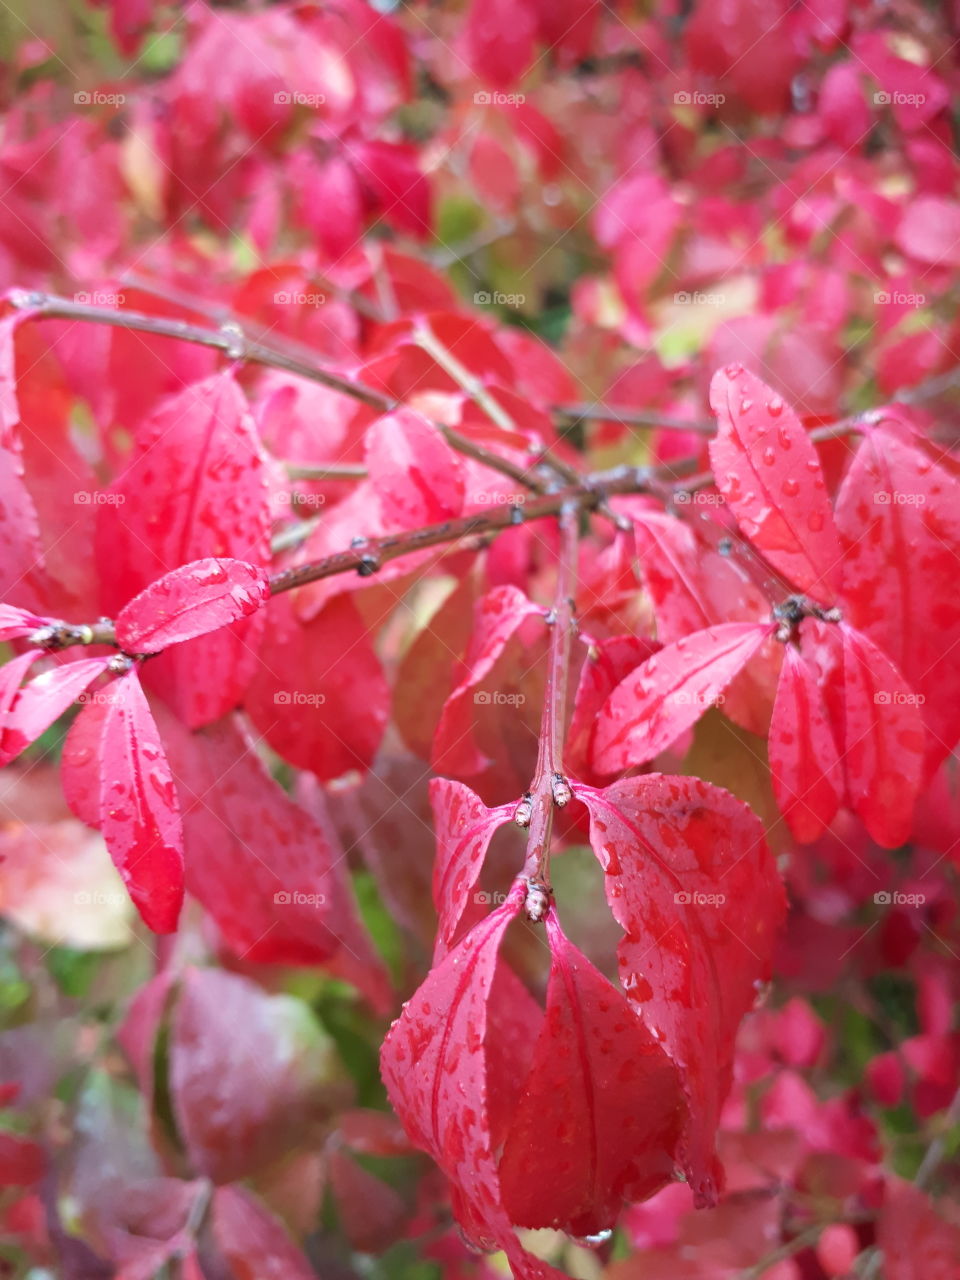 raindrops on red fall leaves